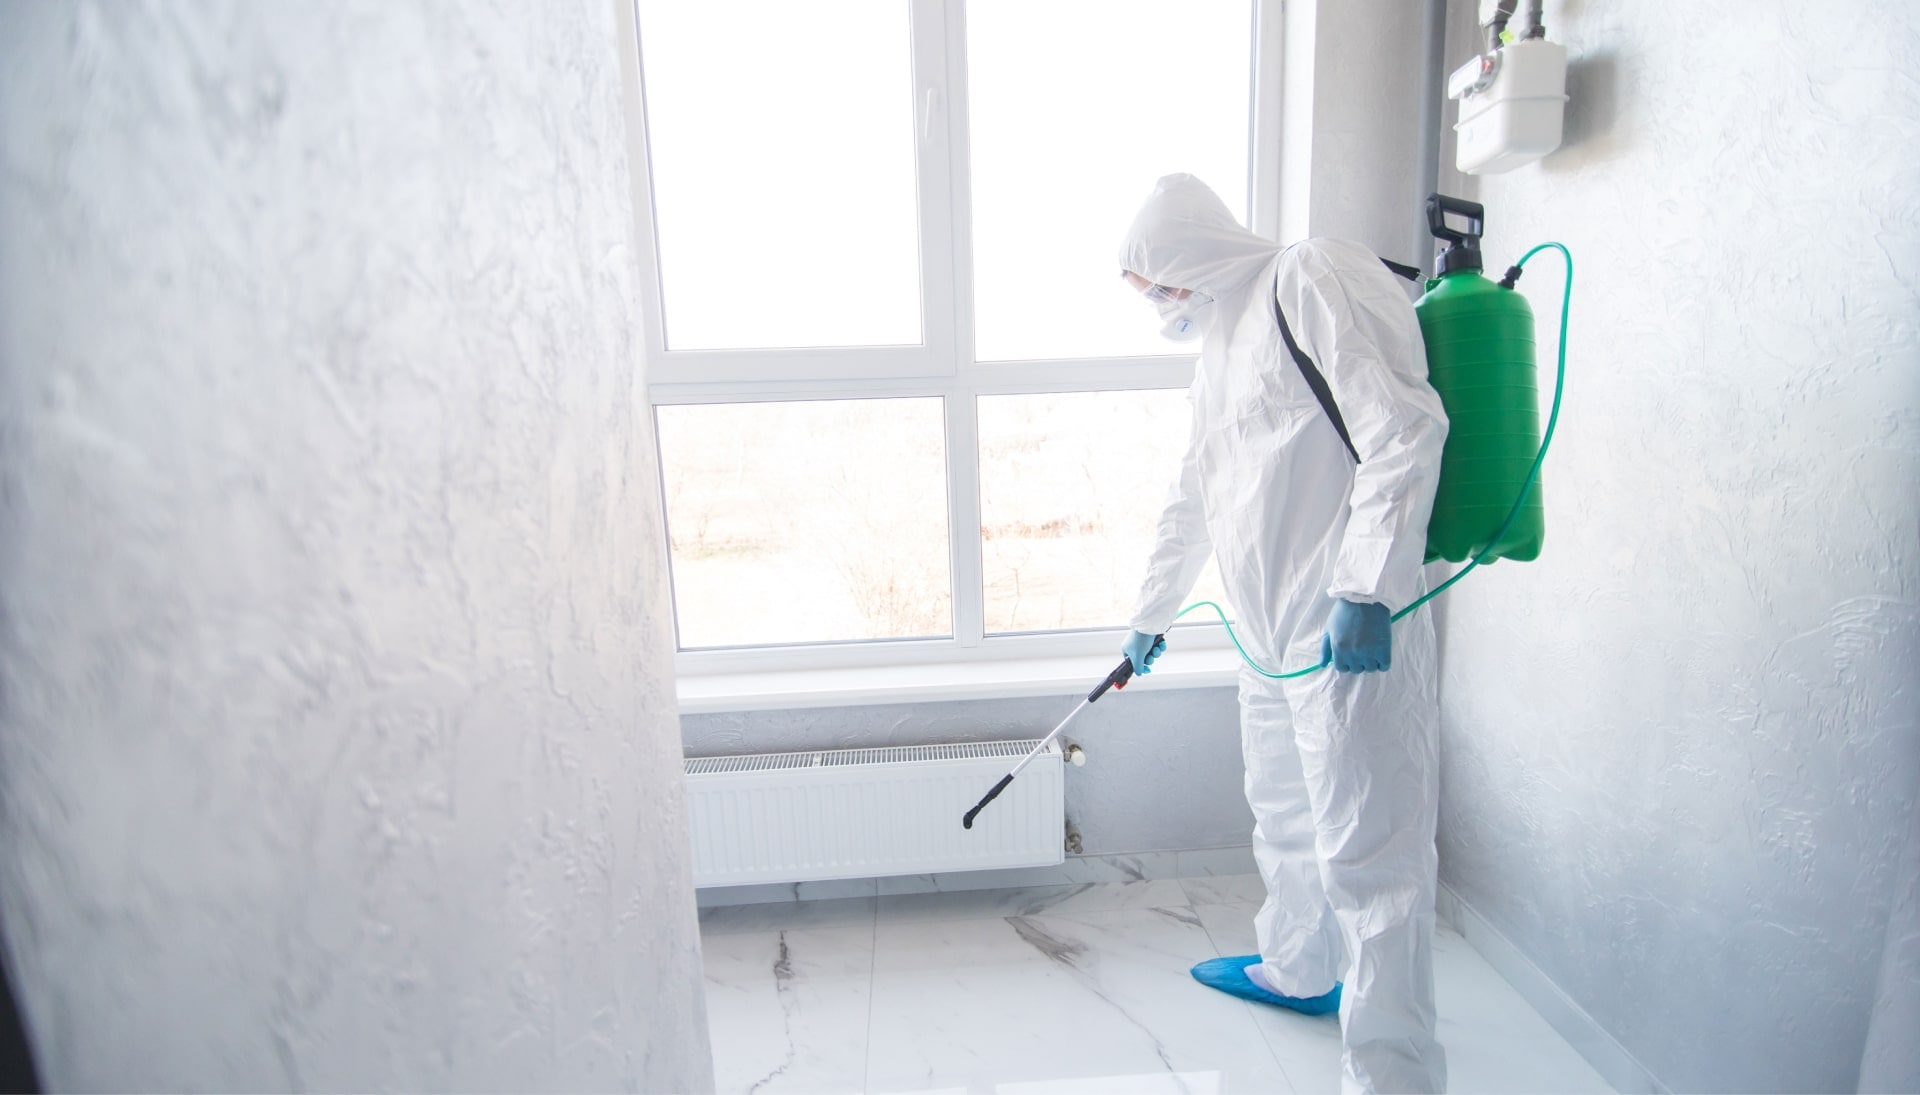 We provide the highest-quality mold inspection, testing, and removal services in the Brunswick, North Carolina area.